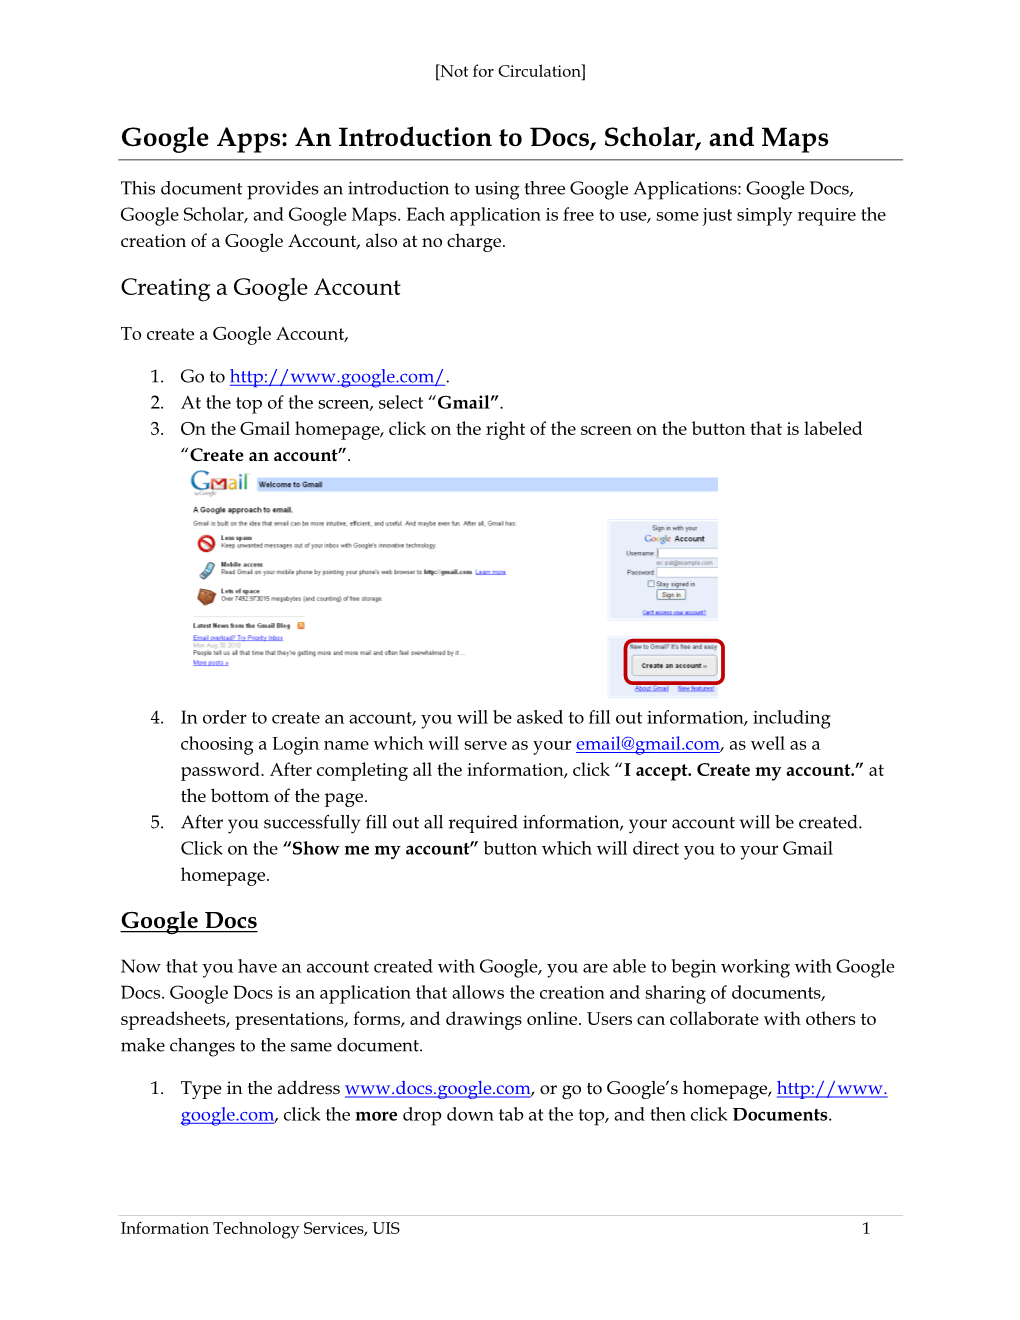 Google Apps: an Introduction to Docs, Scholar, and Maps